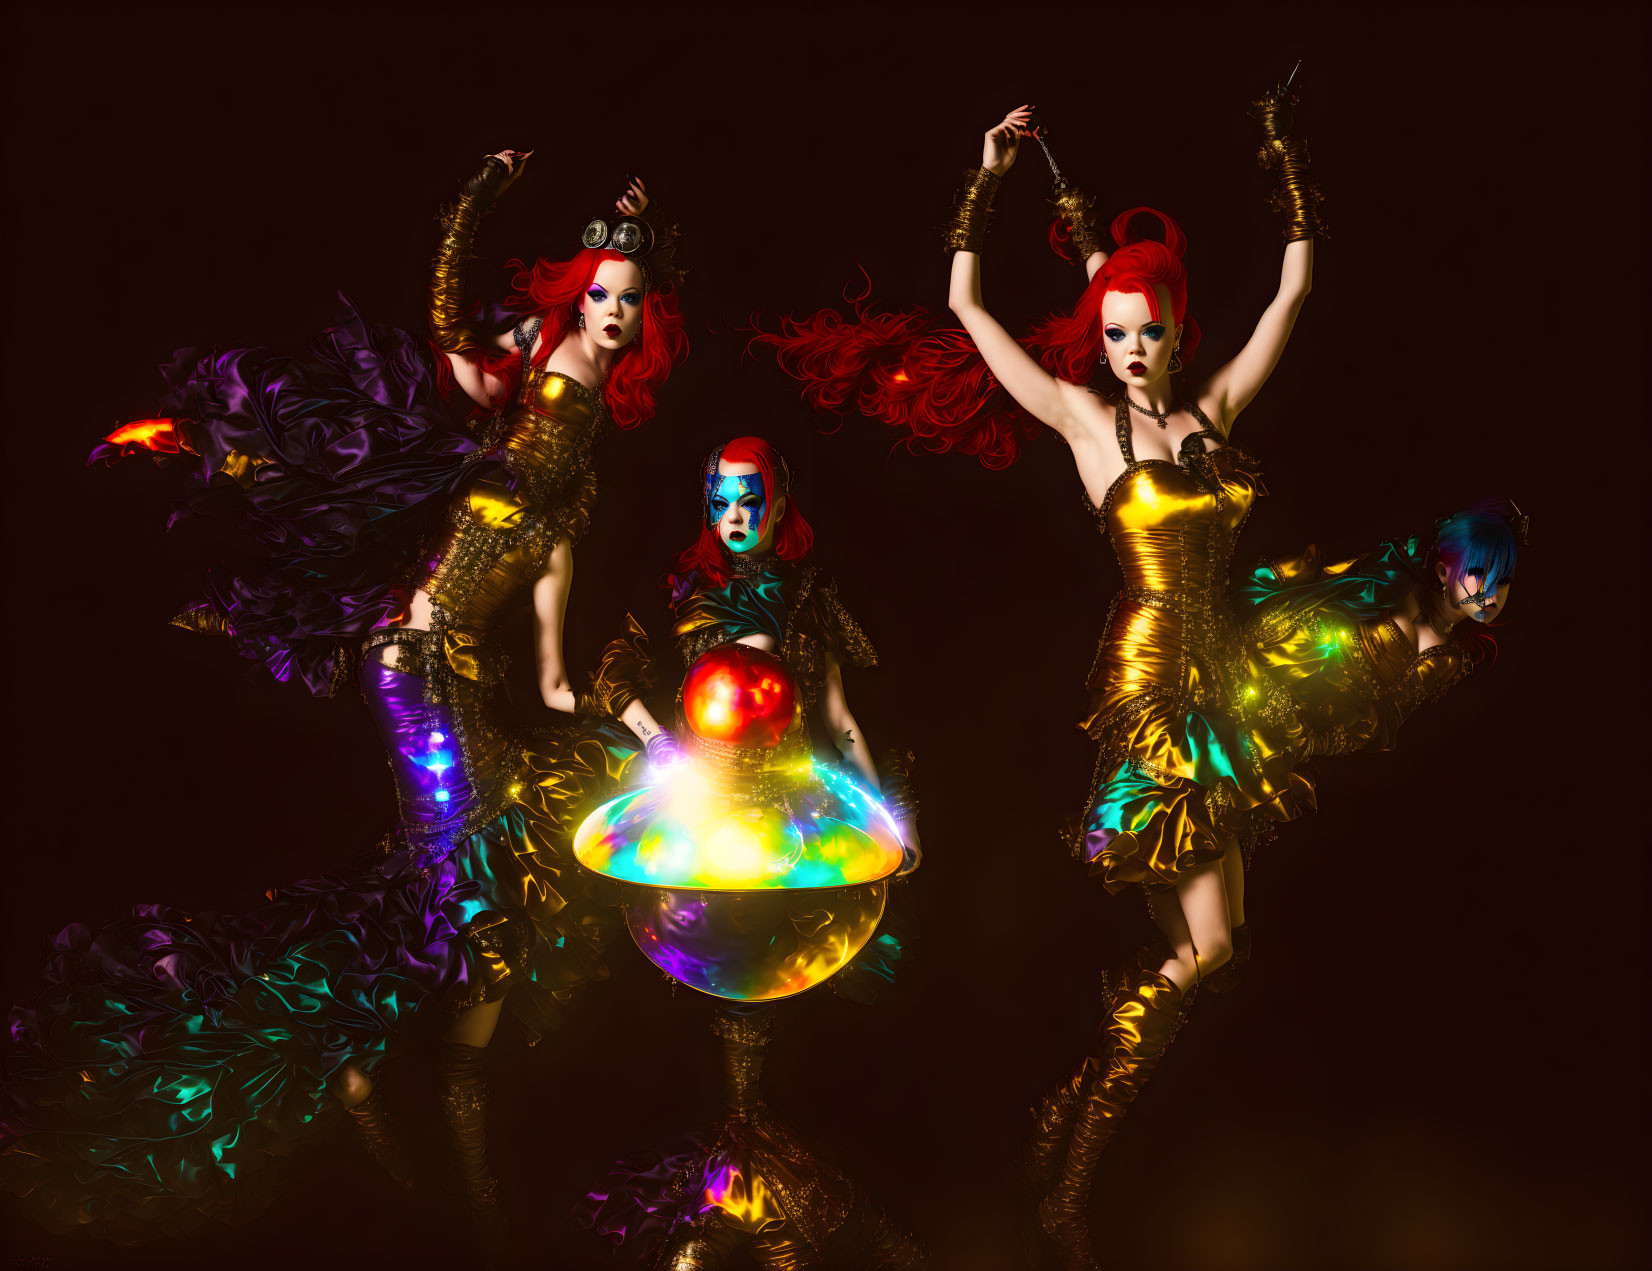 Avant-garde individuals in metallic costumes with vibrant hair and glowing orb